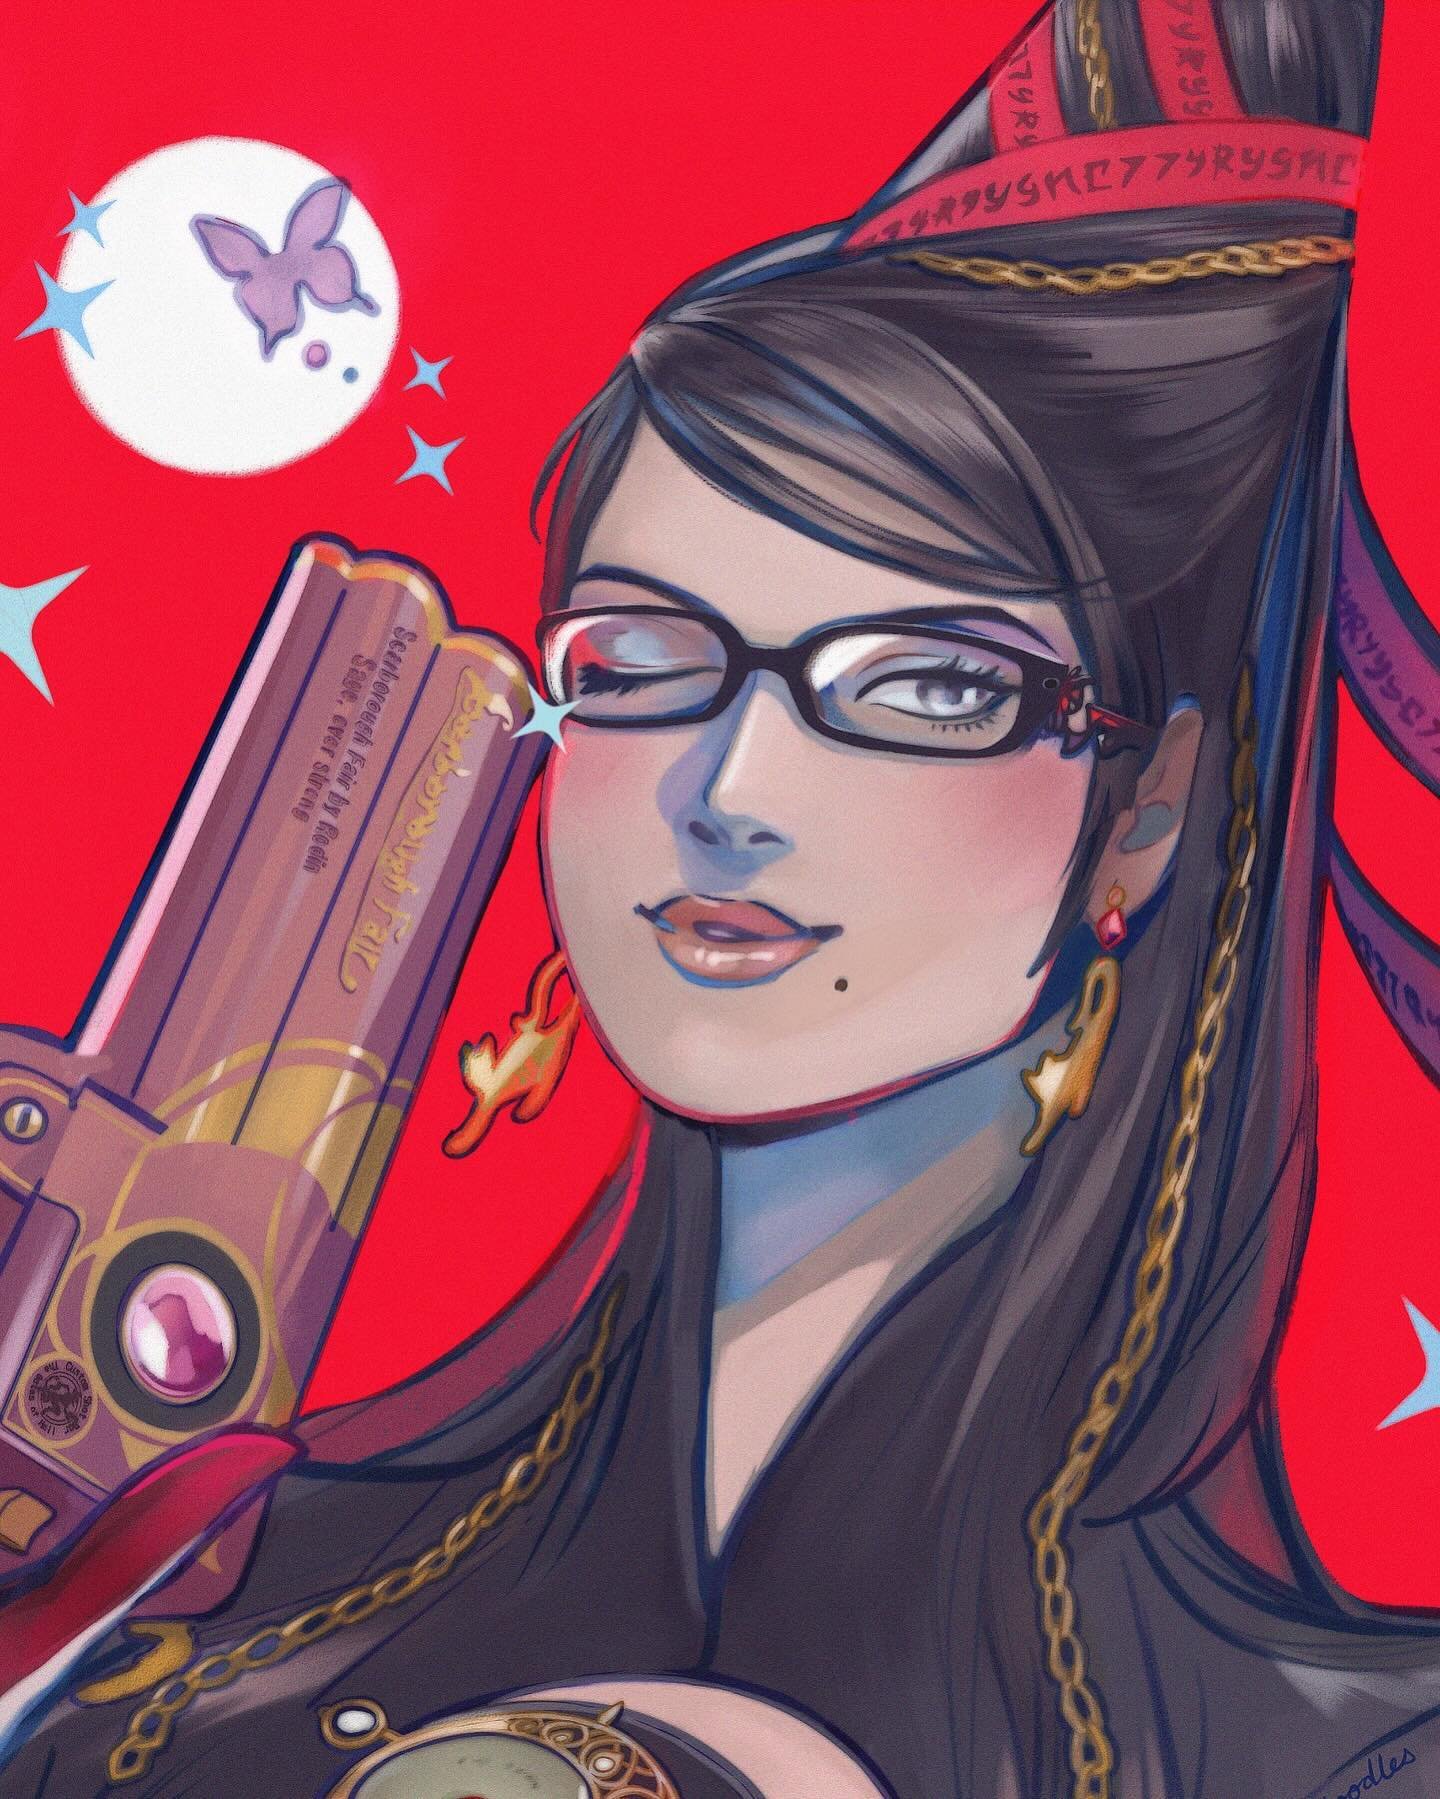 Fly me to the moon 🌙 💋
Swipe to see process video ➡️

Get this pretty witch print in my shop, link in bio! What&rsquo;s your favorite look from Bayonetta? 

#bayonetta #bayonettafanart #bayonettaart #digitalart #artprocess #speedpaint